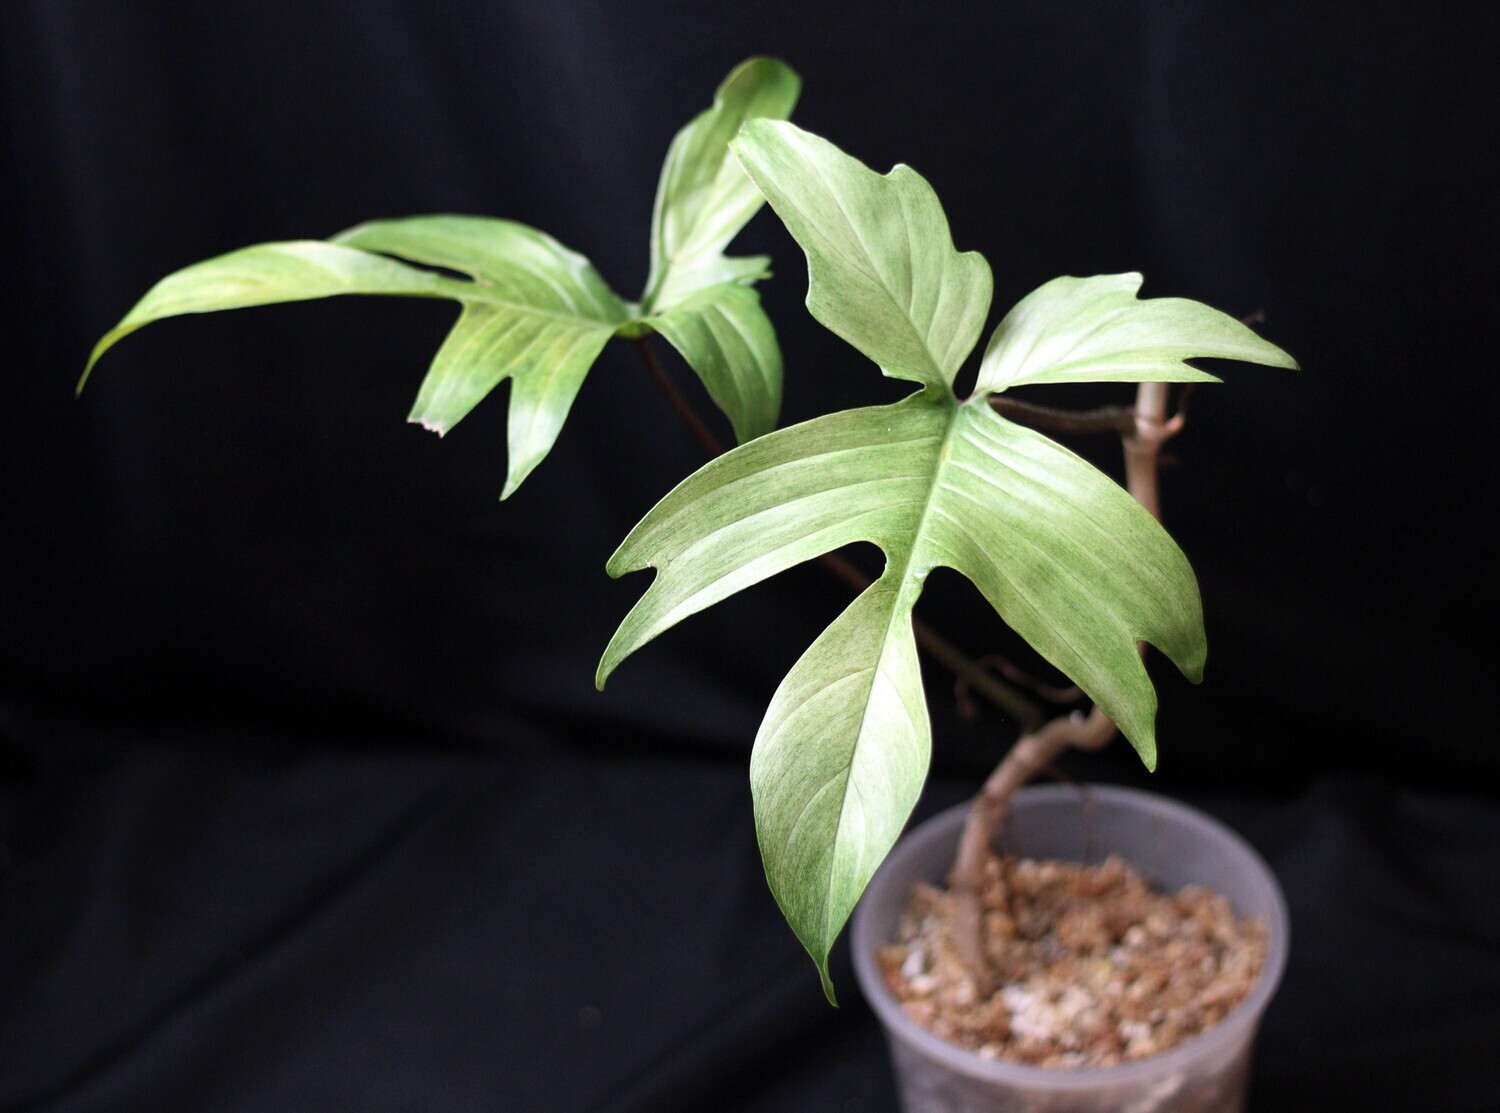 Philodendron Florida Ghost “Mint” - A